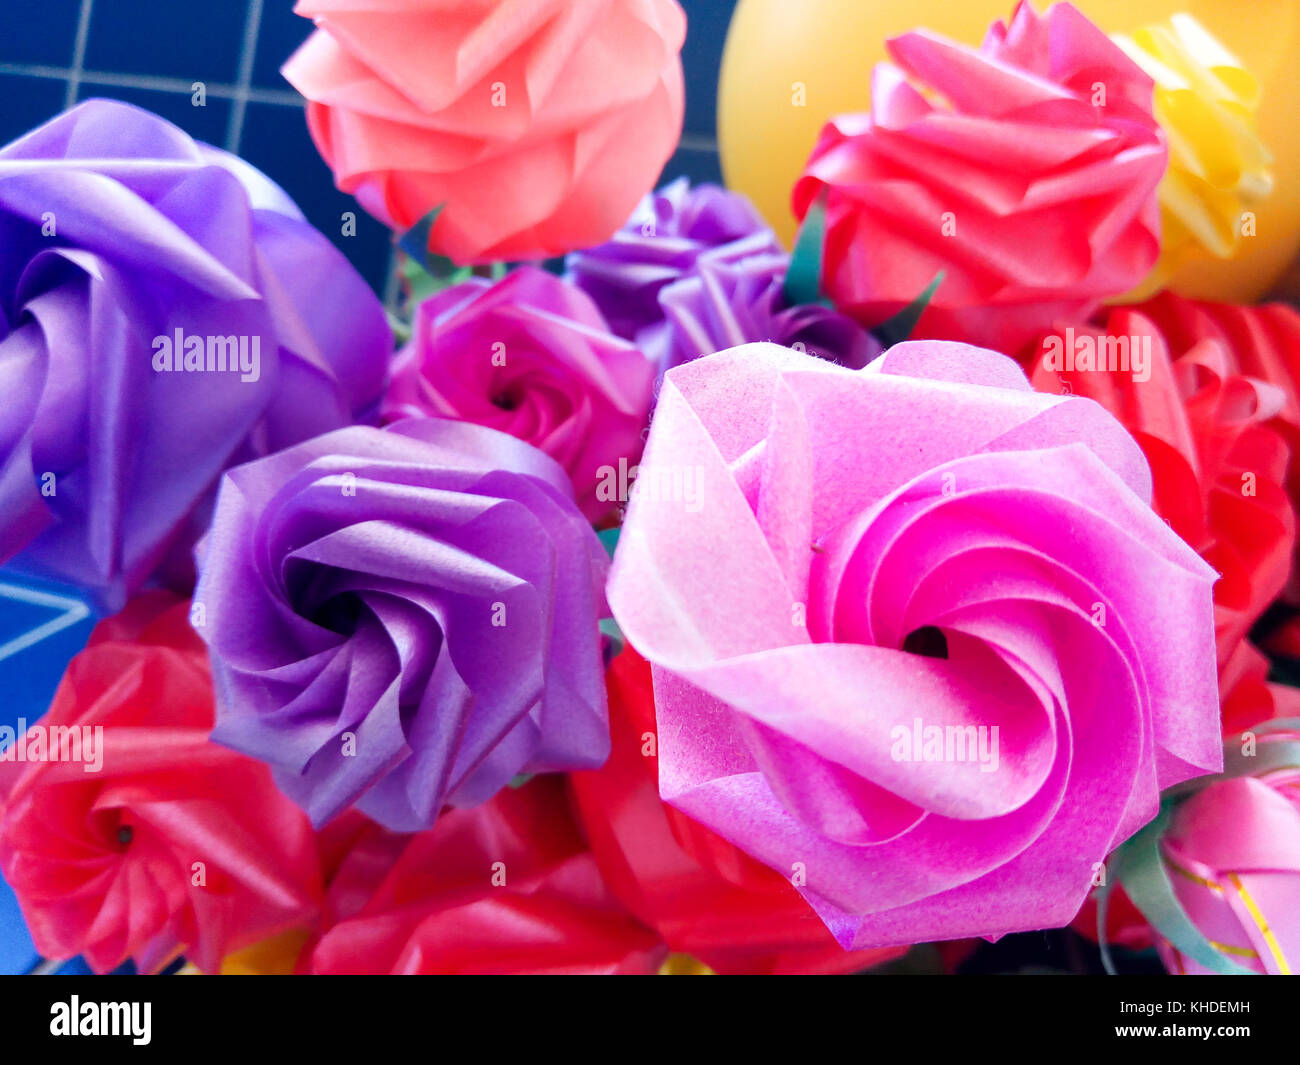 Rose fake flower and Floral backgroundrose flowers made of fabric. The fabric flowers bouquet. Colorful of decoration artificial flower. Stock Photo